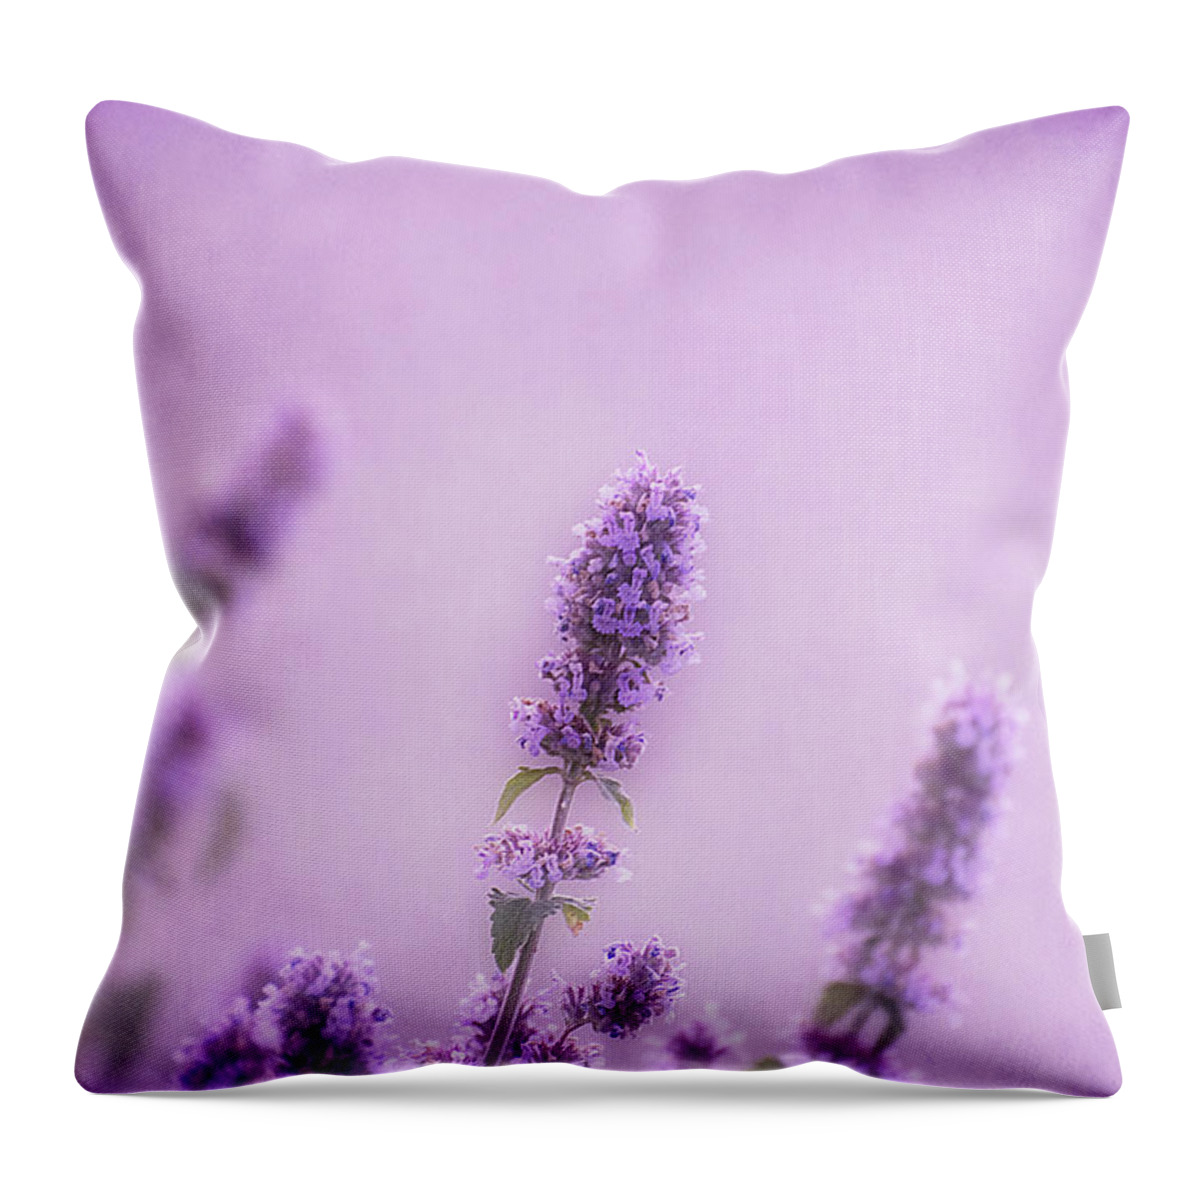 Monochrome Throw Pillow featuring the photograph Like a Warm Soft Summer Breeze by Robin Webster